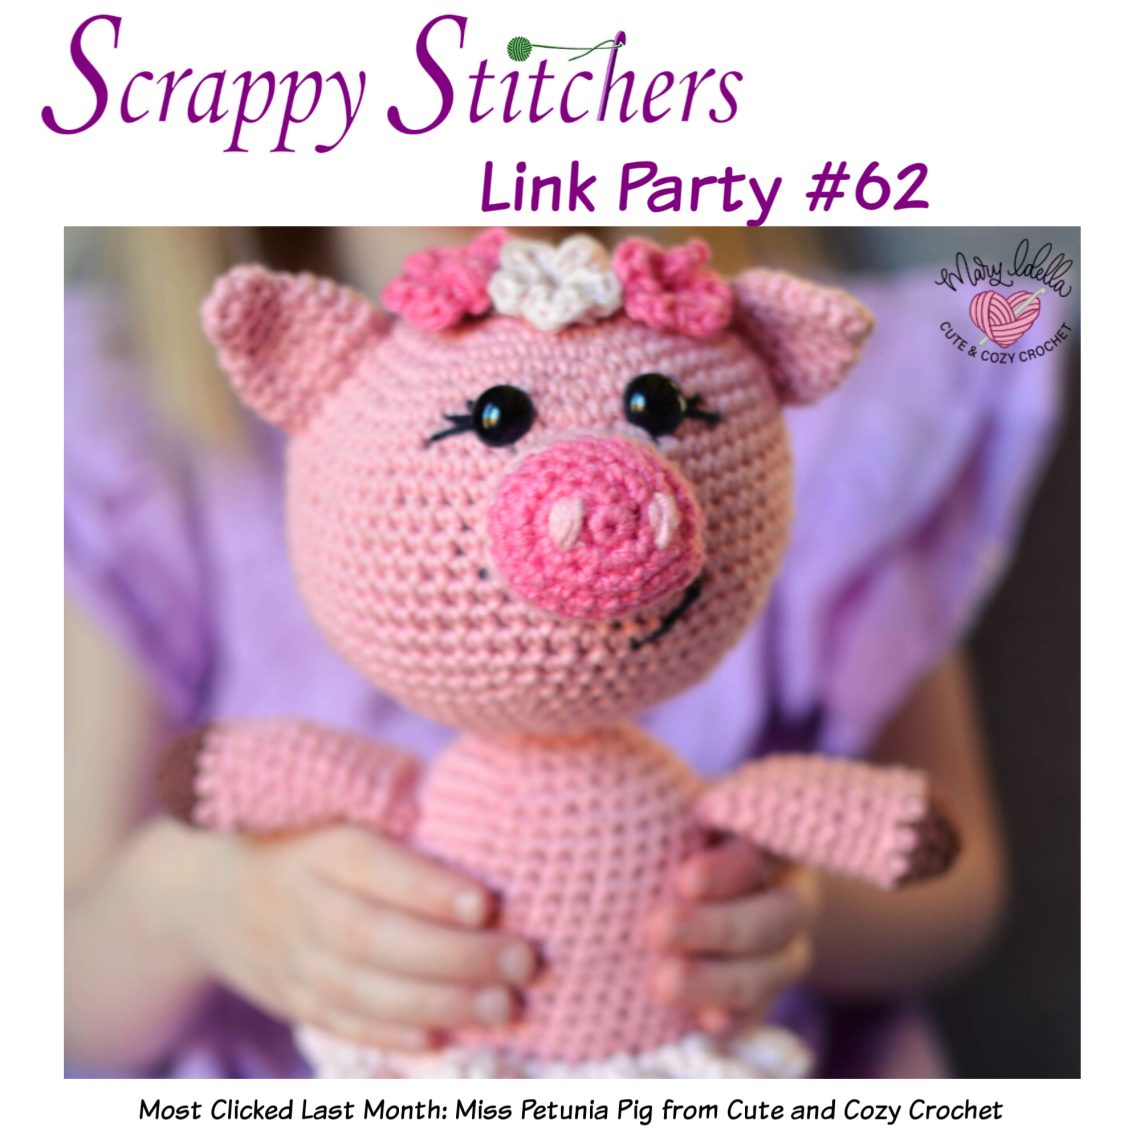 Scrappy Stitchers Link Party 62 - April 2020 - most clicked last month Miss Petunia Pig from Cute and Cozy Crochet